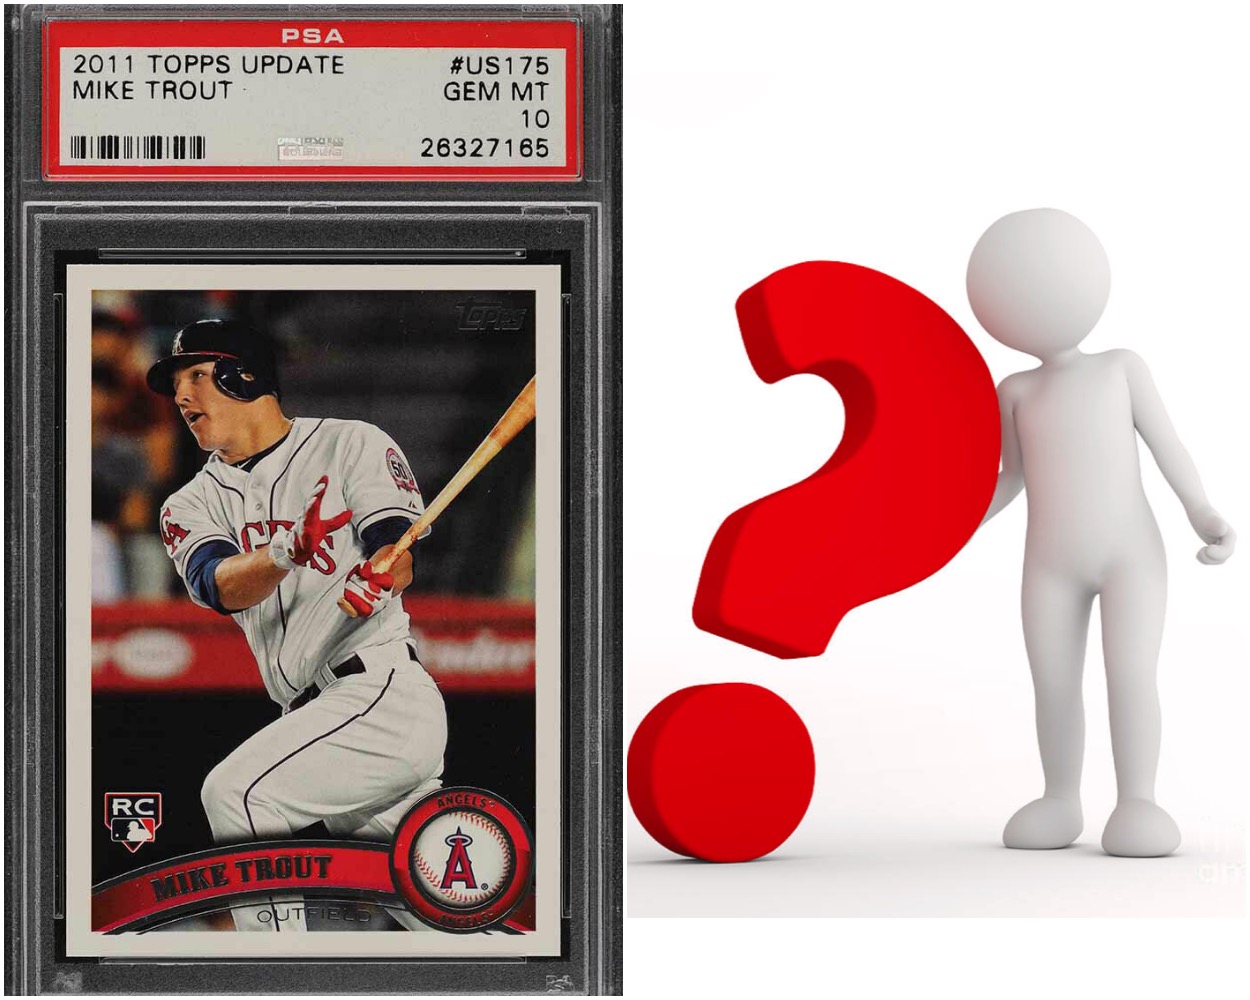 SlabStox graphic of 2011 Topps Update Mike Trout sports trading card and icon man holding question mark